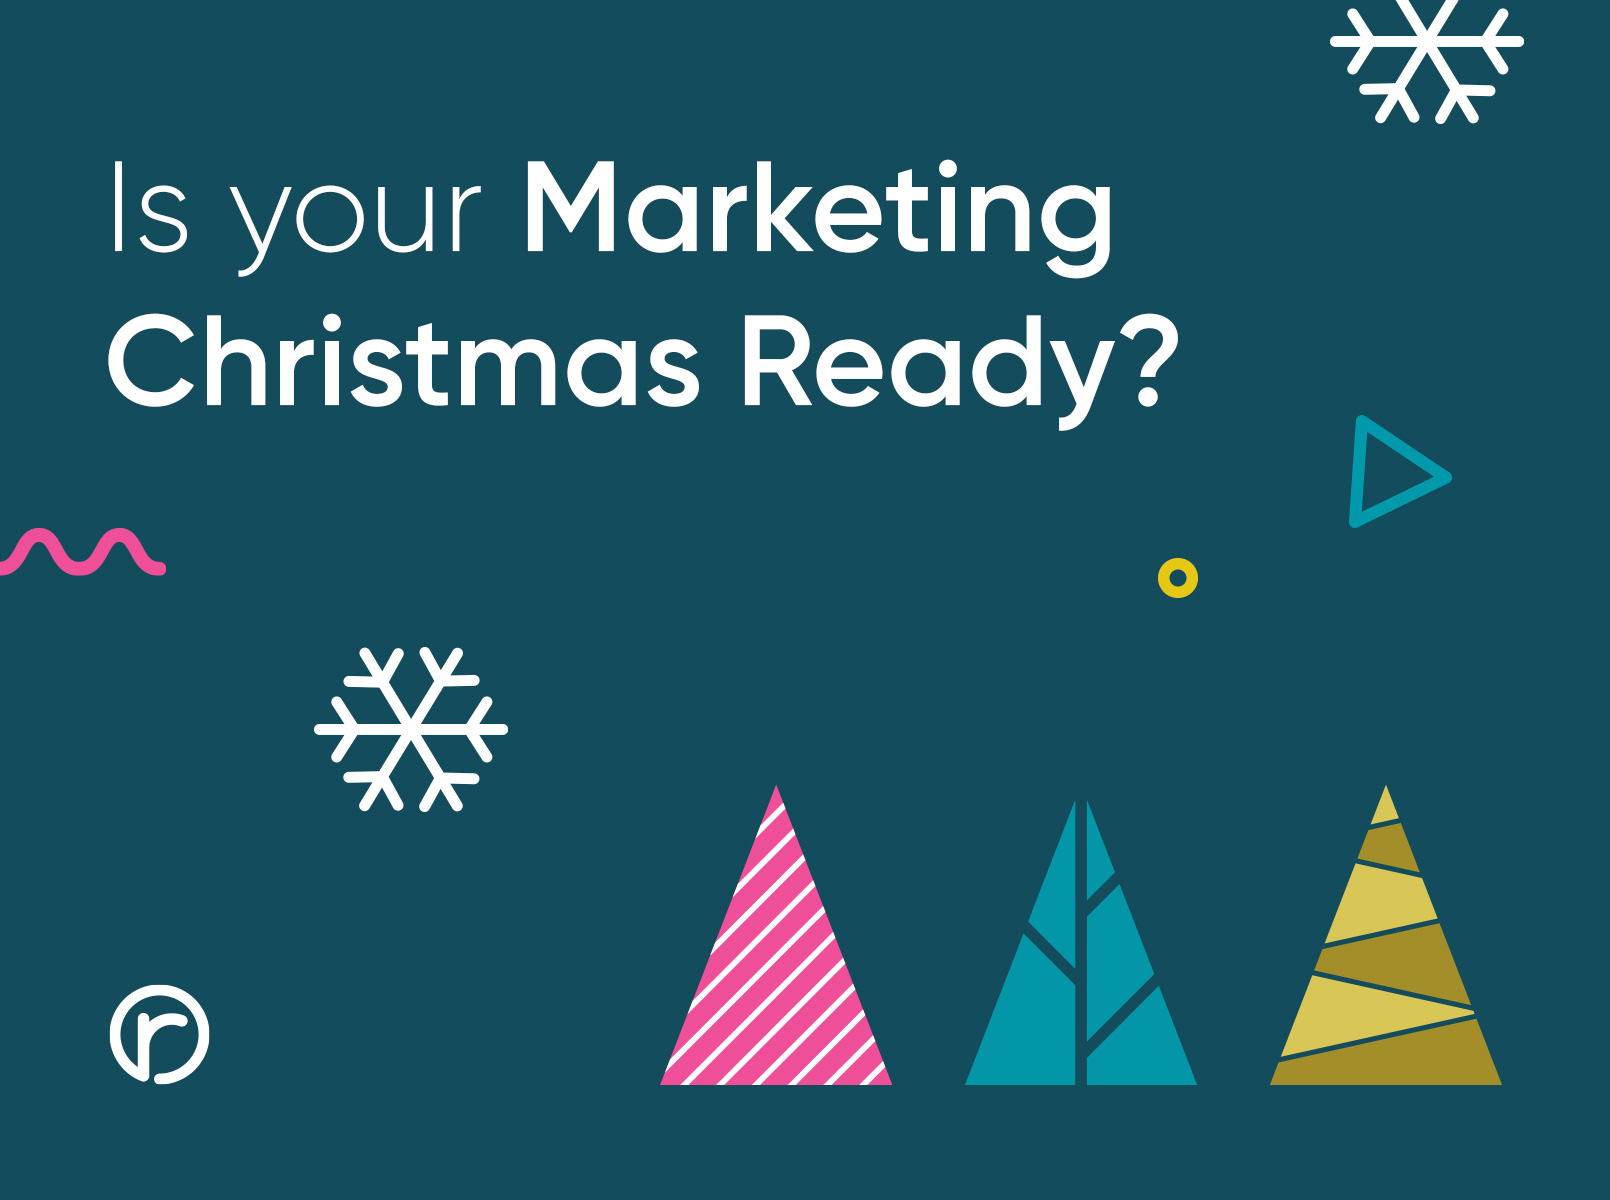 Is your Marketing Christmas Ready?